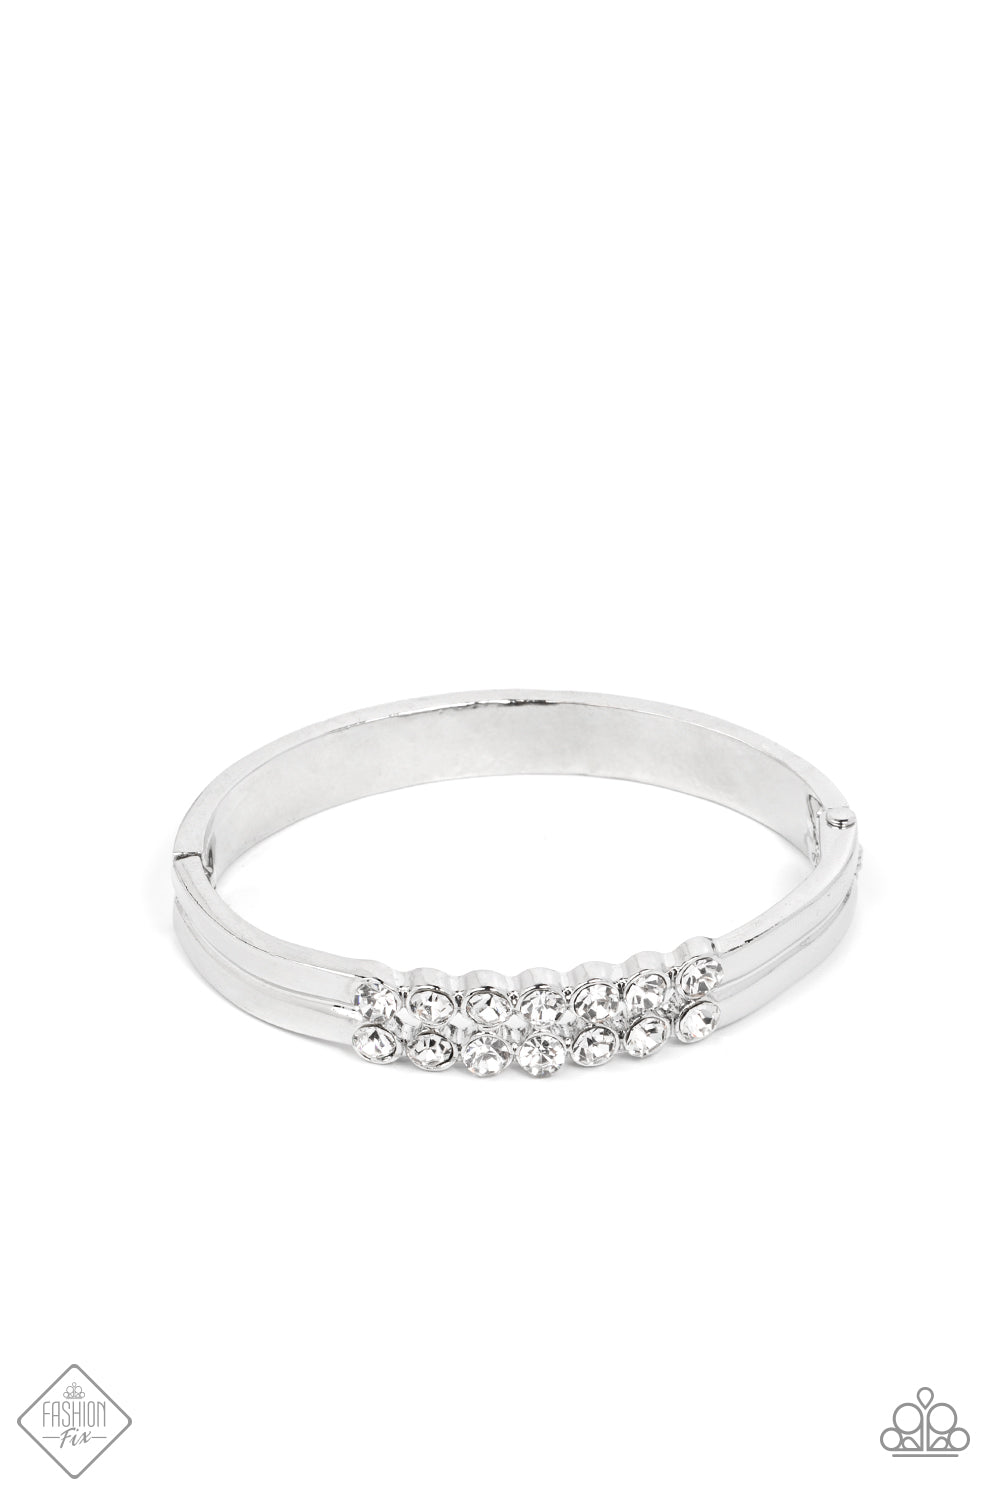 Stacked layers of brilliant white rhinestones give way to double layers of sleek silver frames